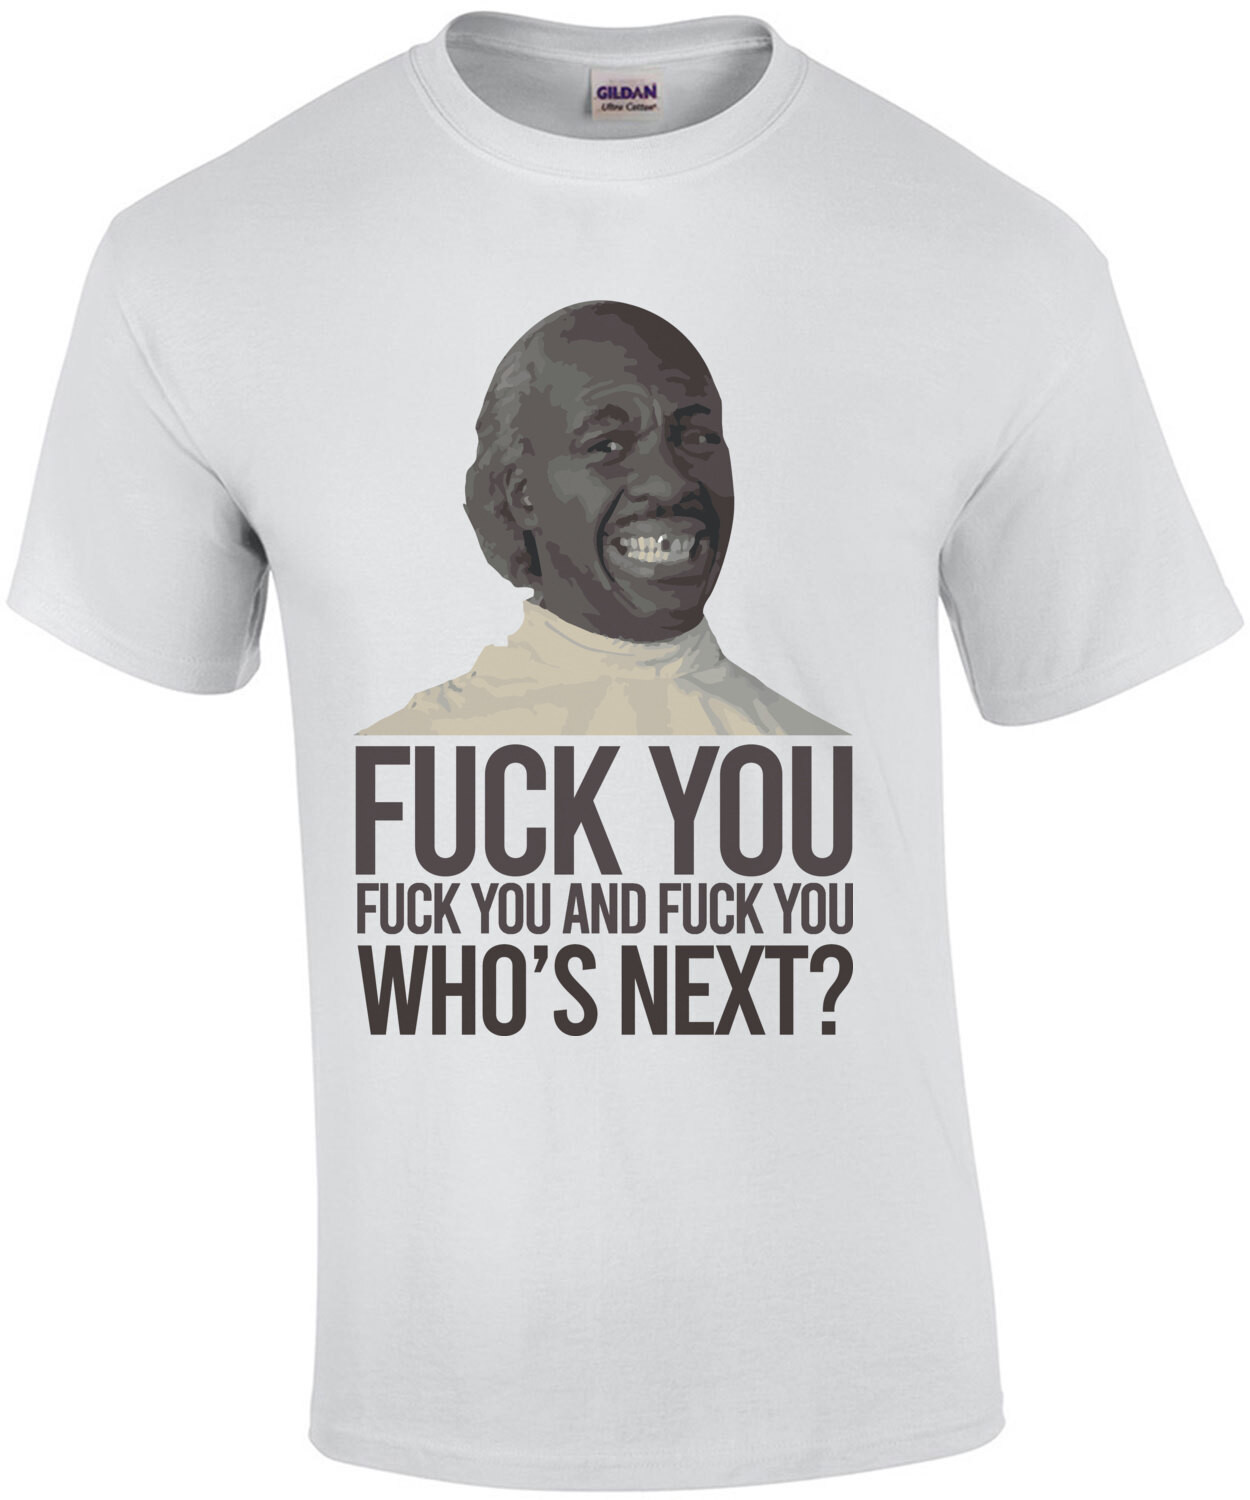 Fuck you, fuck you, and fuck you - who's next? Eddie Murphy Barber - Coming To America T-Shirt 80's T-Shirt 